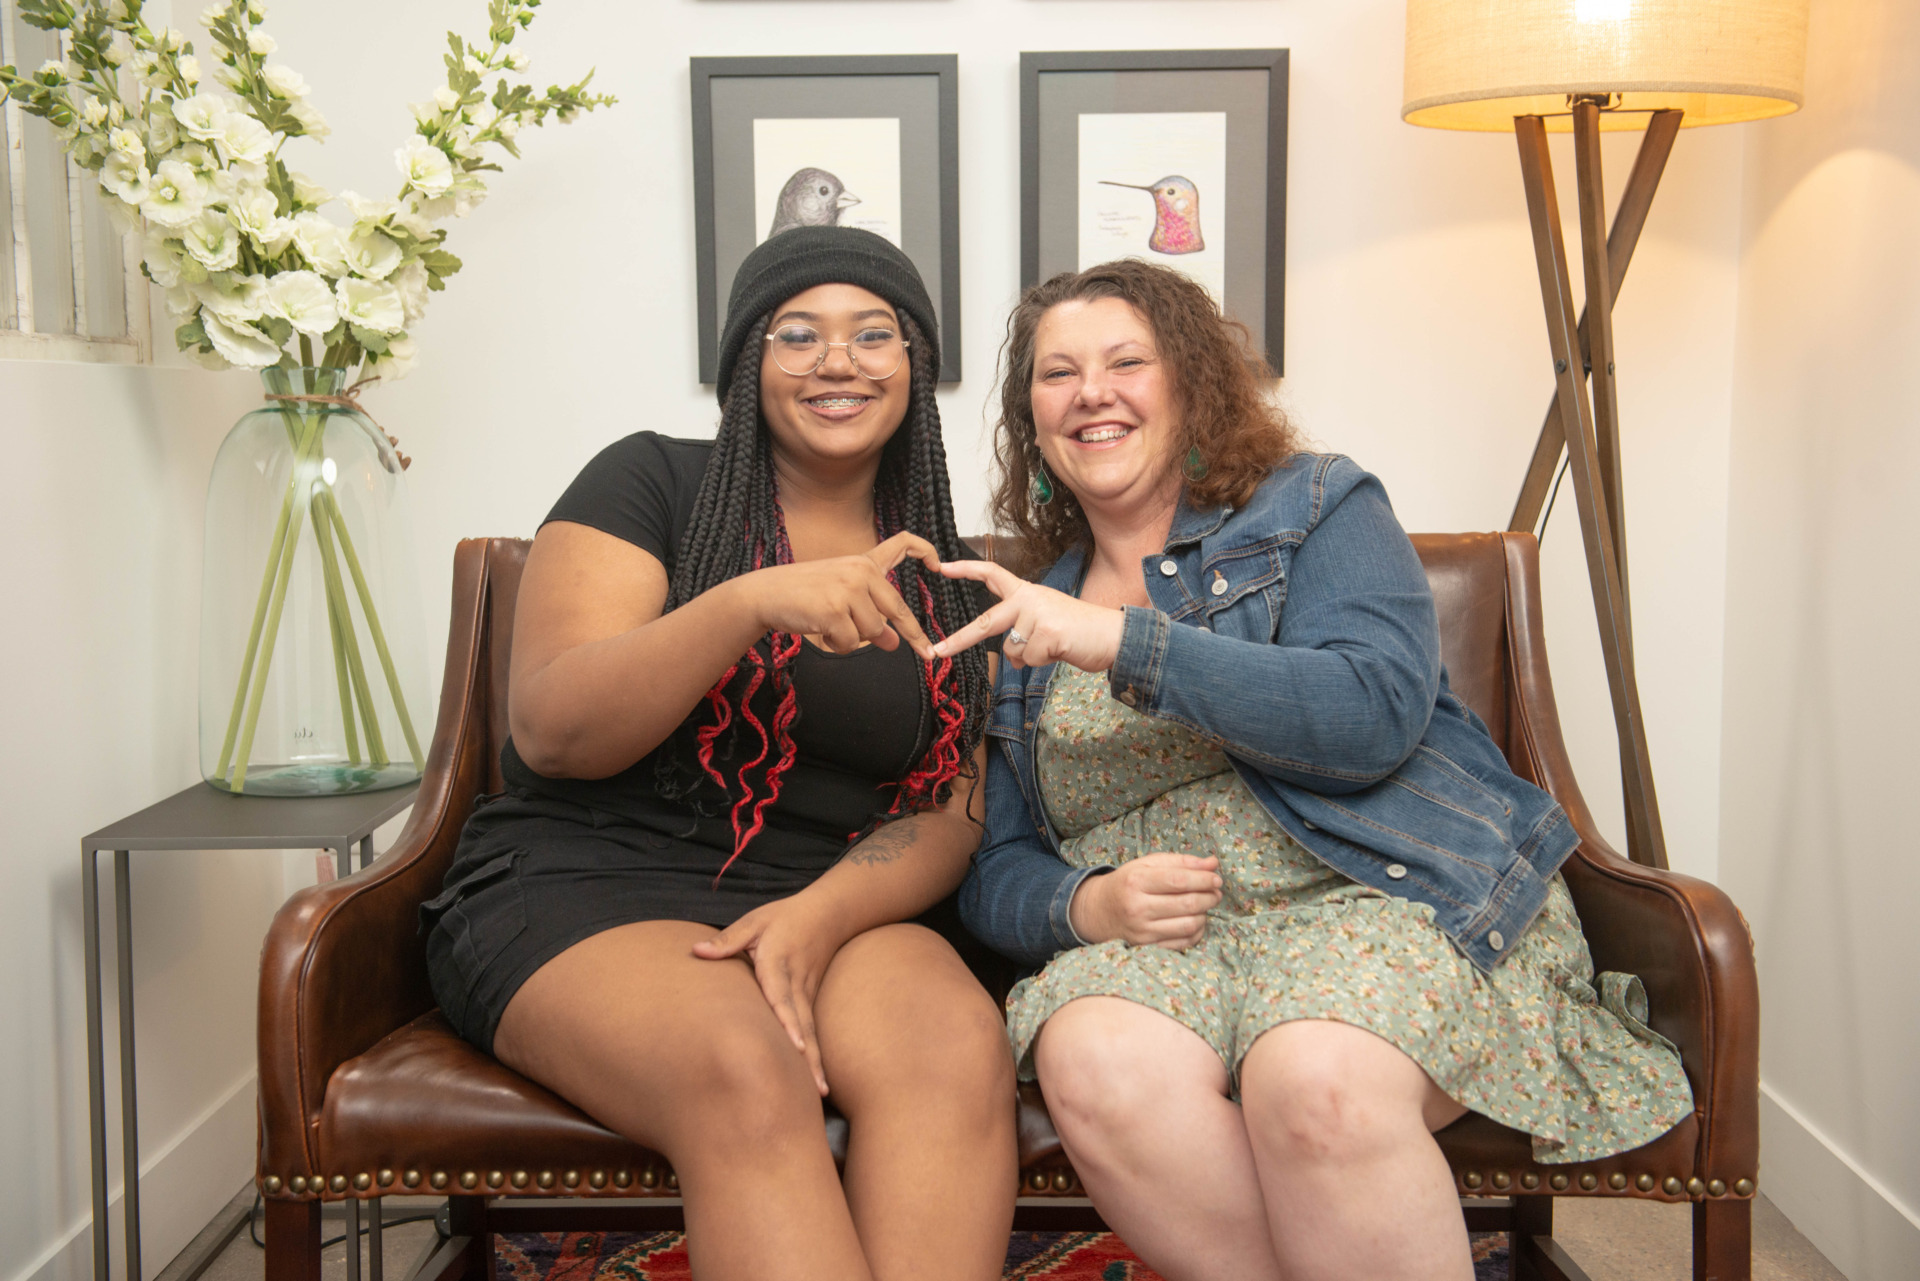 An adoptive mother and daughter sitting on the couch making a heart with their hands